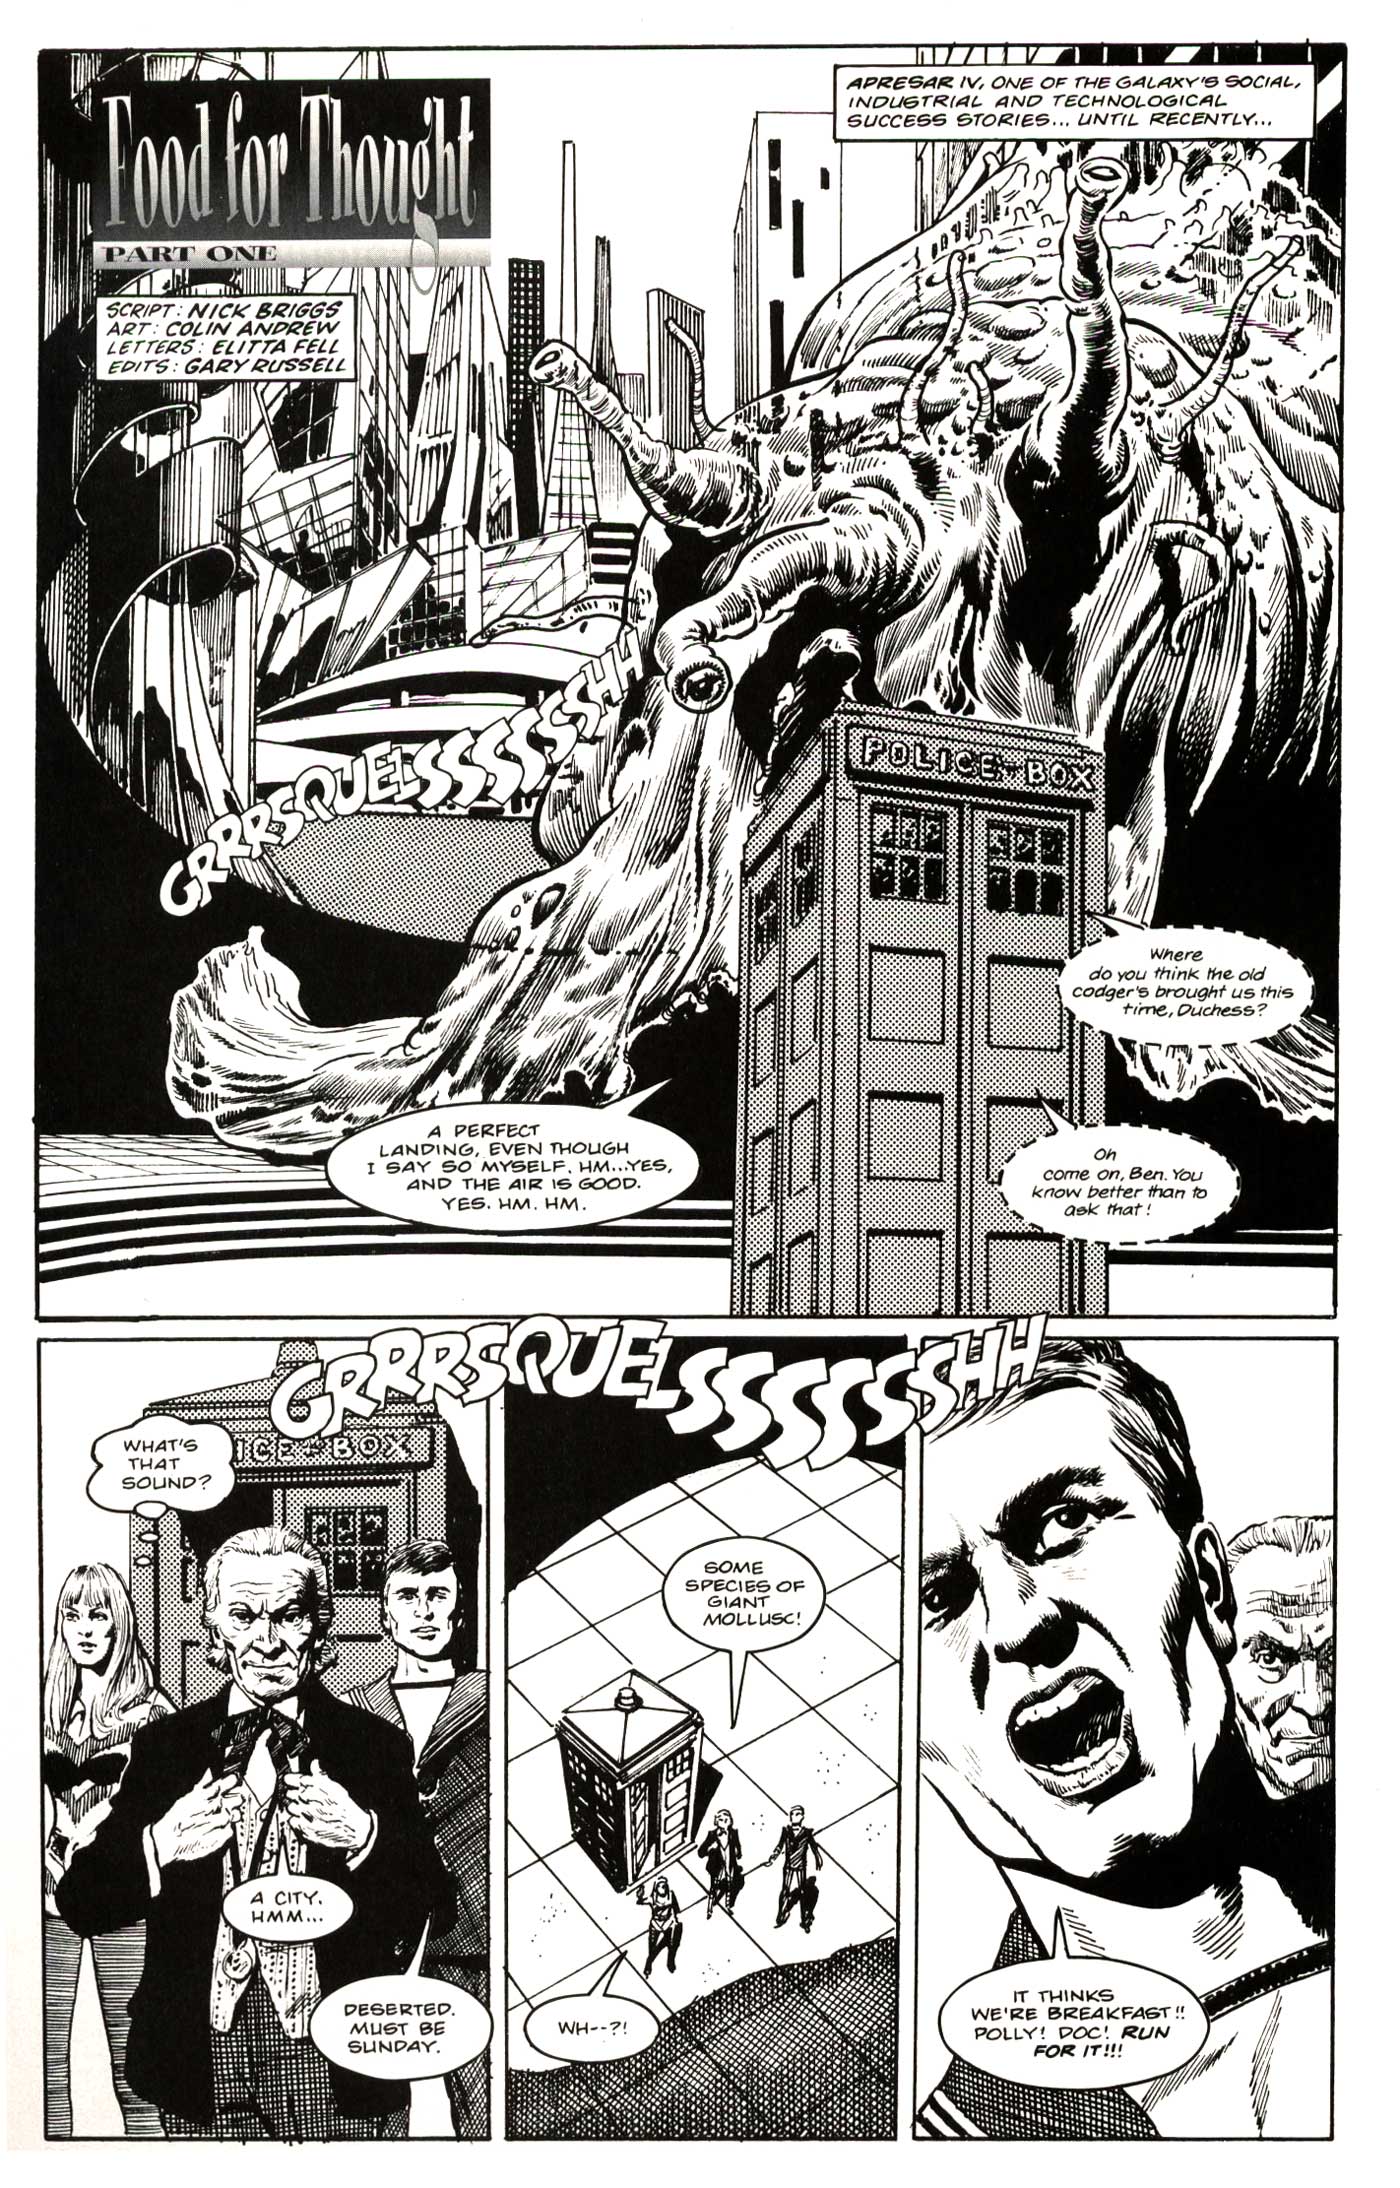 Art from "Food for Thought", a First Doctor story by Nicholas Briggs, drawn by Colin Andrew